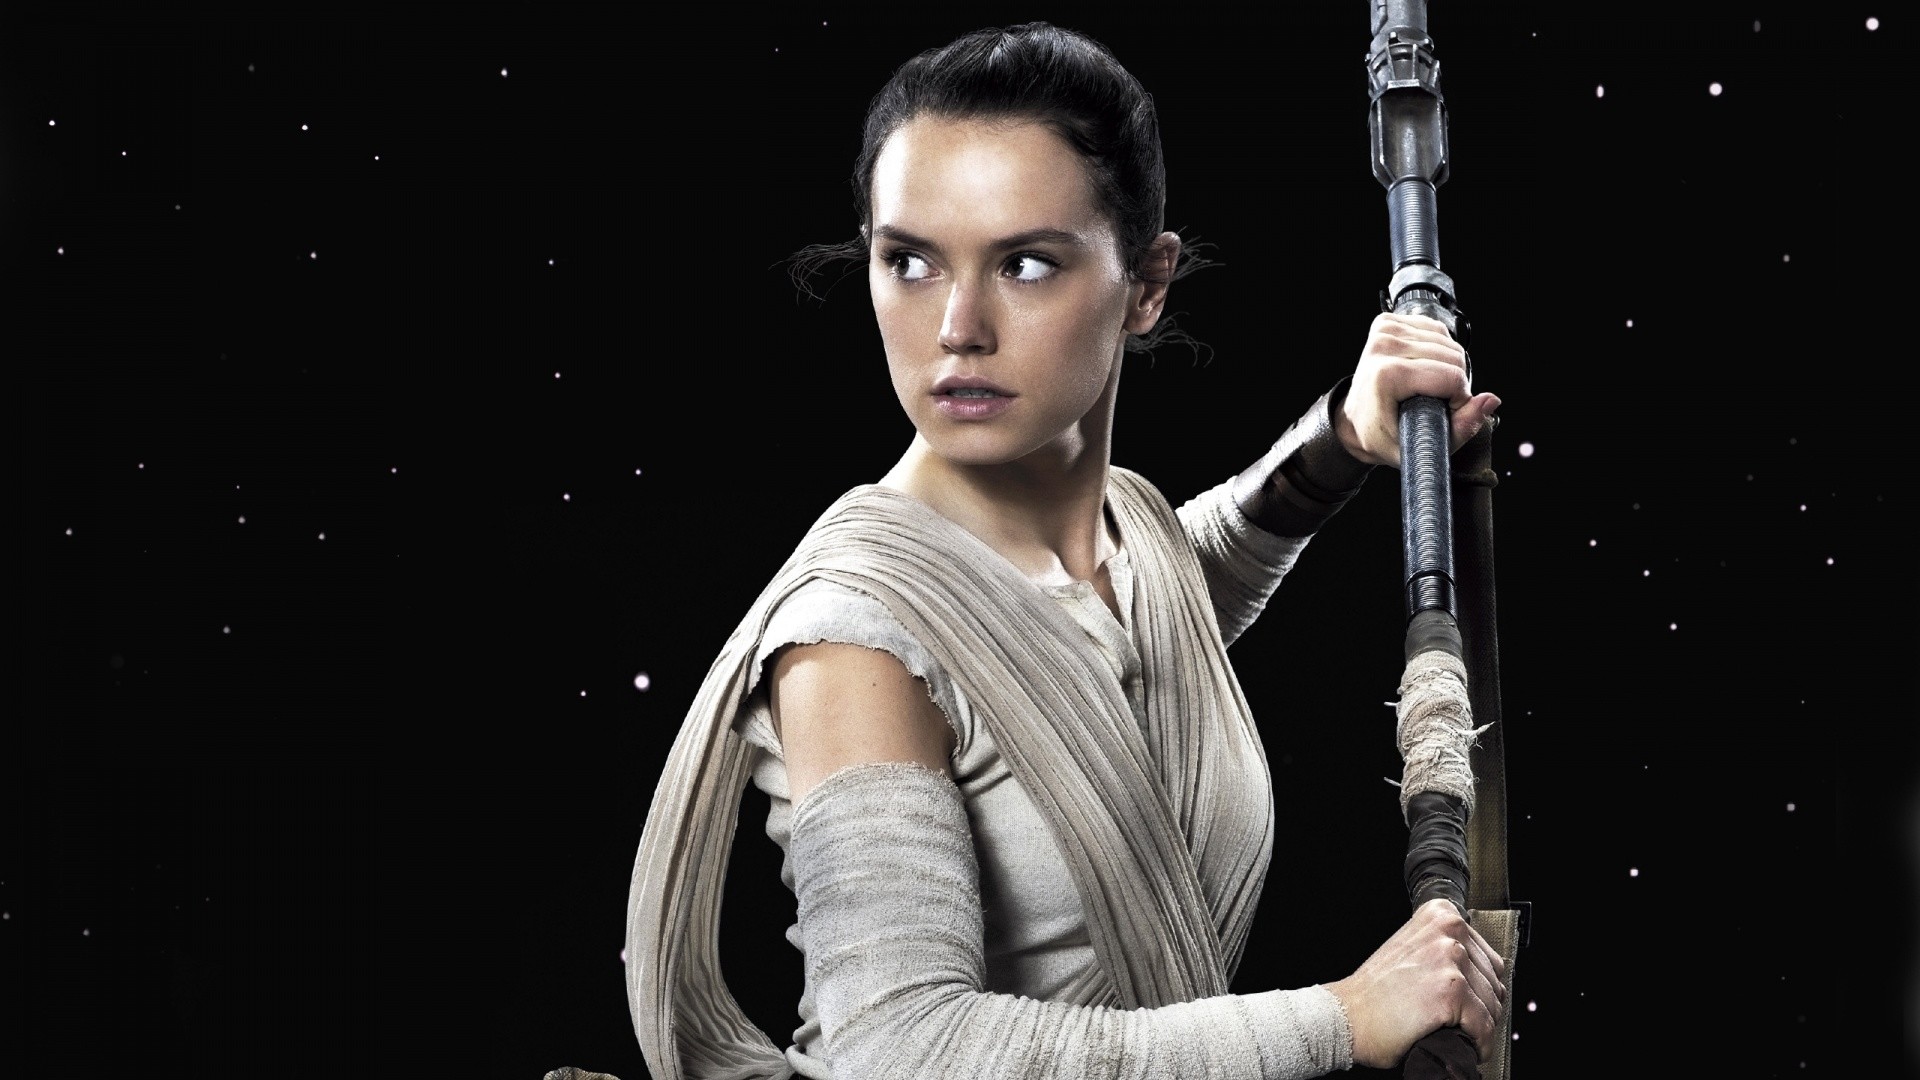 Daisy Ridley Rey Star Wars The Force Awakens Wallpapers